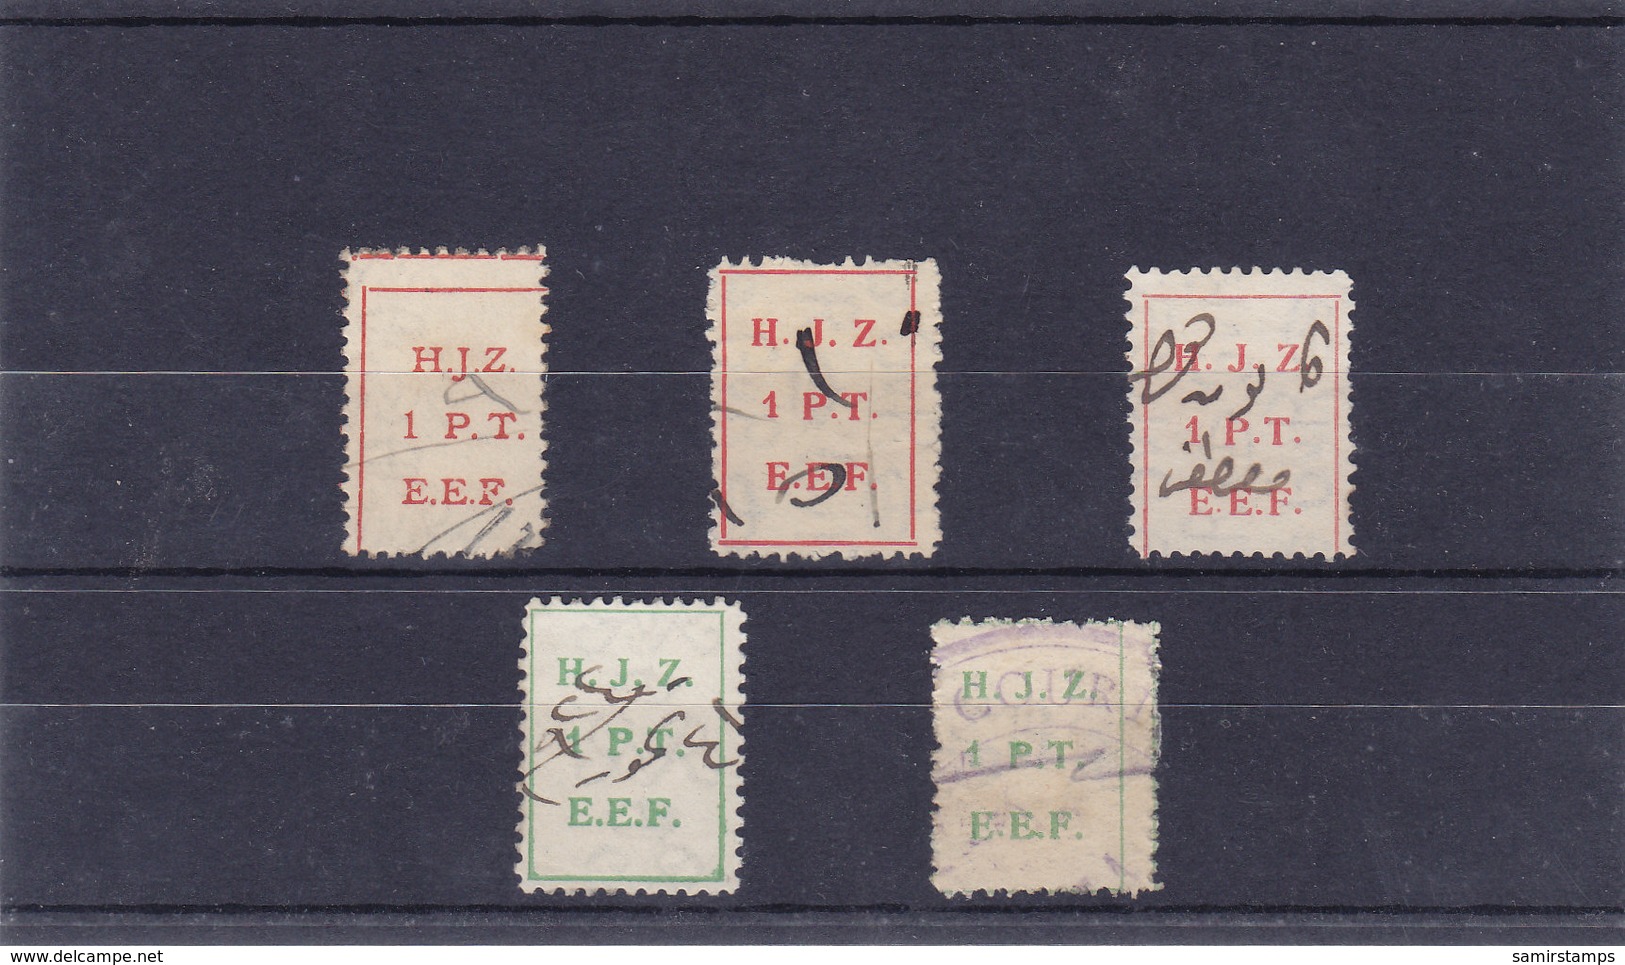 Palestine Revenue Hedaz Railways 5 Stamps Used, 1 PT  Red & Green,Diff Size,colors, EEF.Scarce- Red. Price- SKRILL ONLY - Palestine